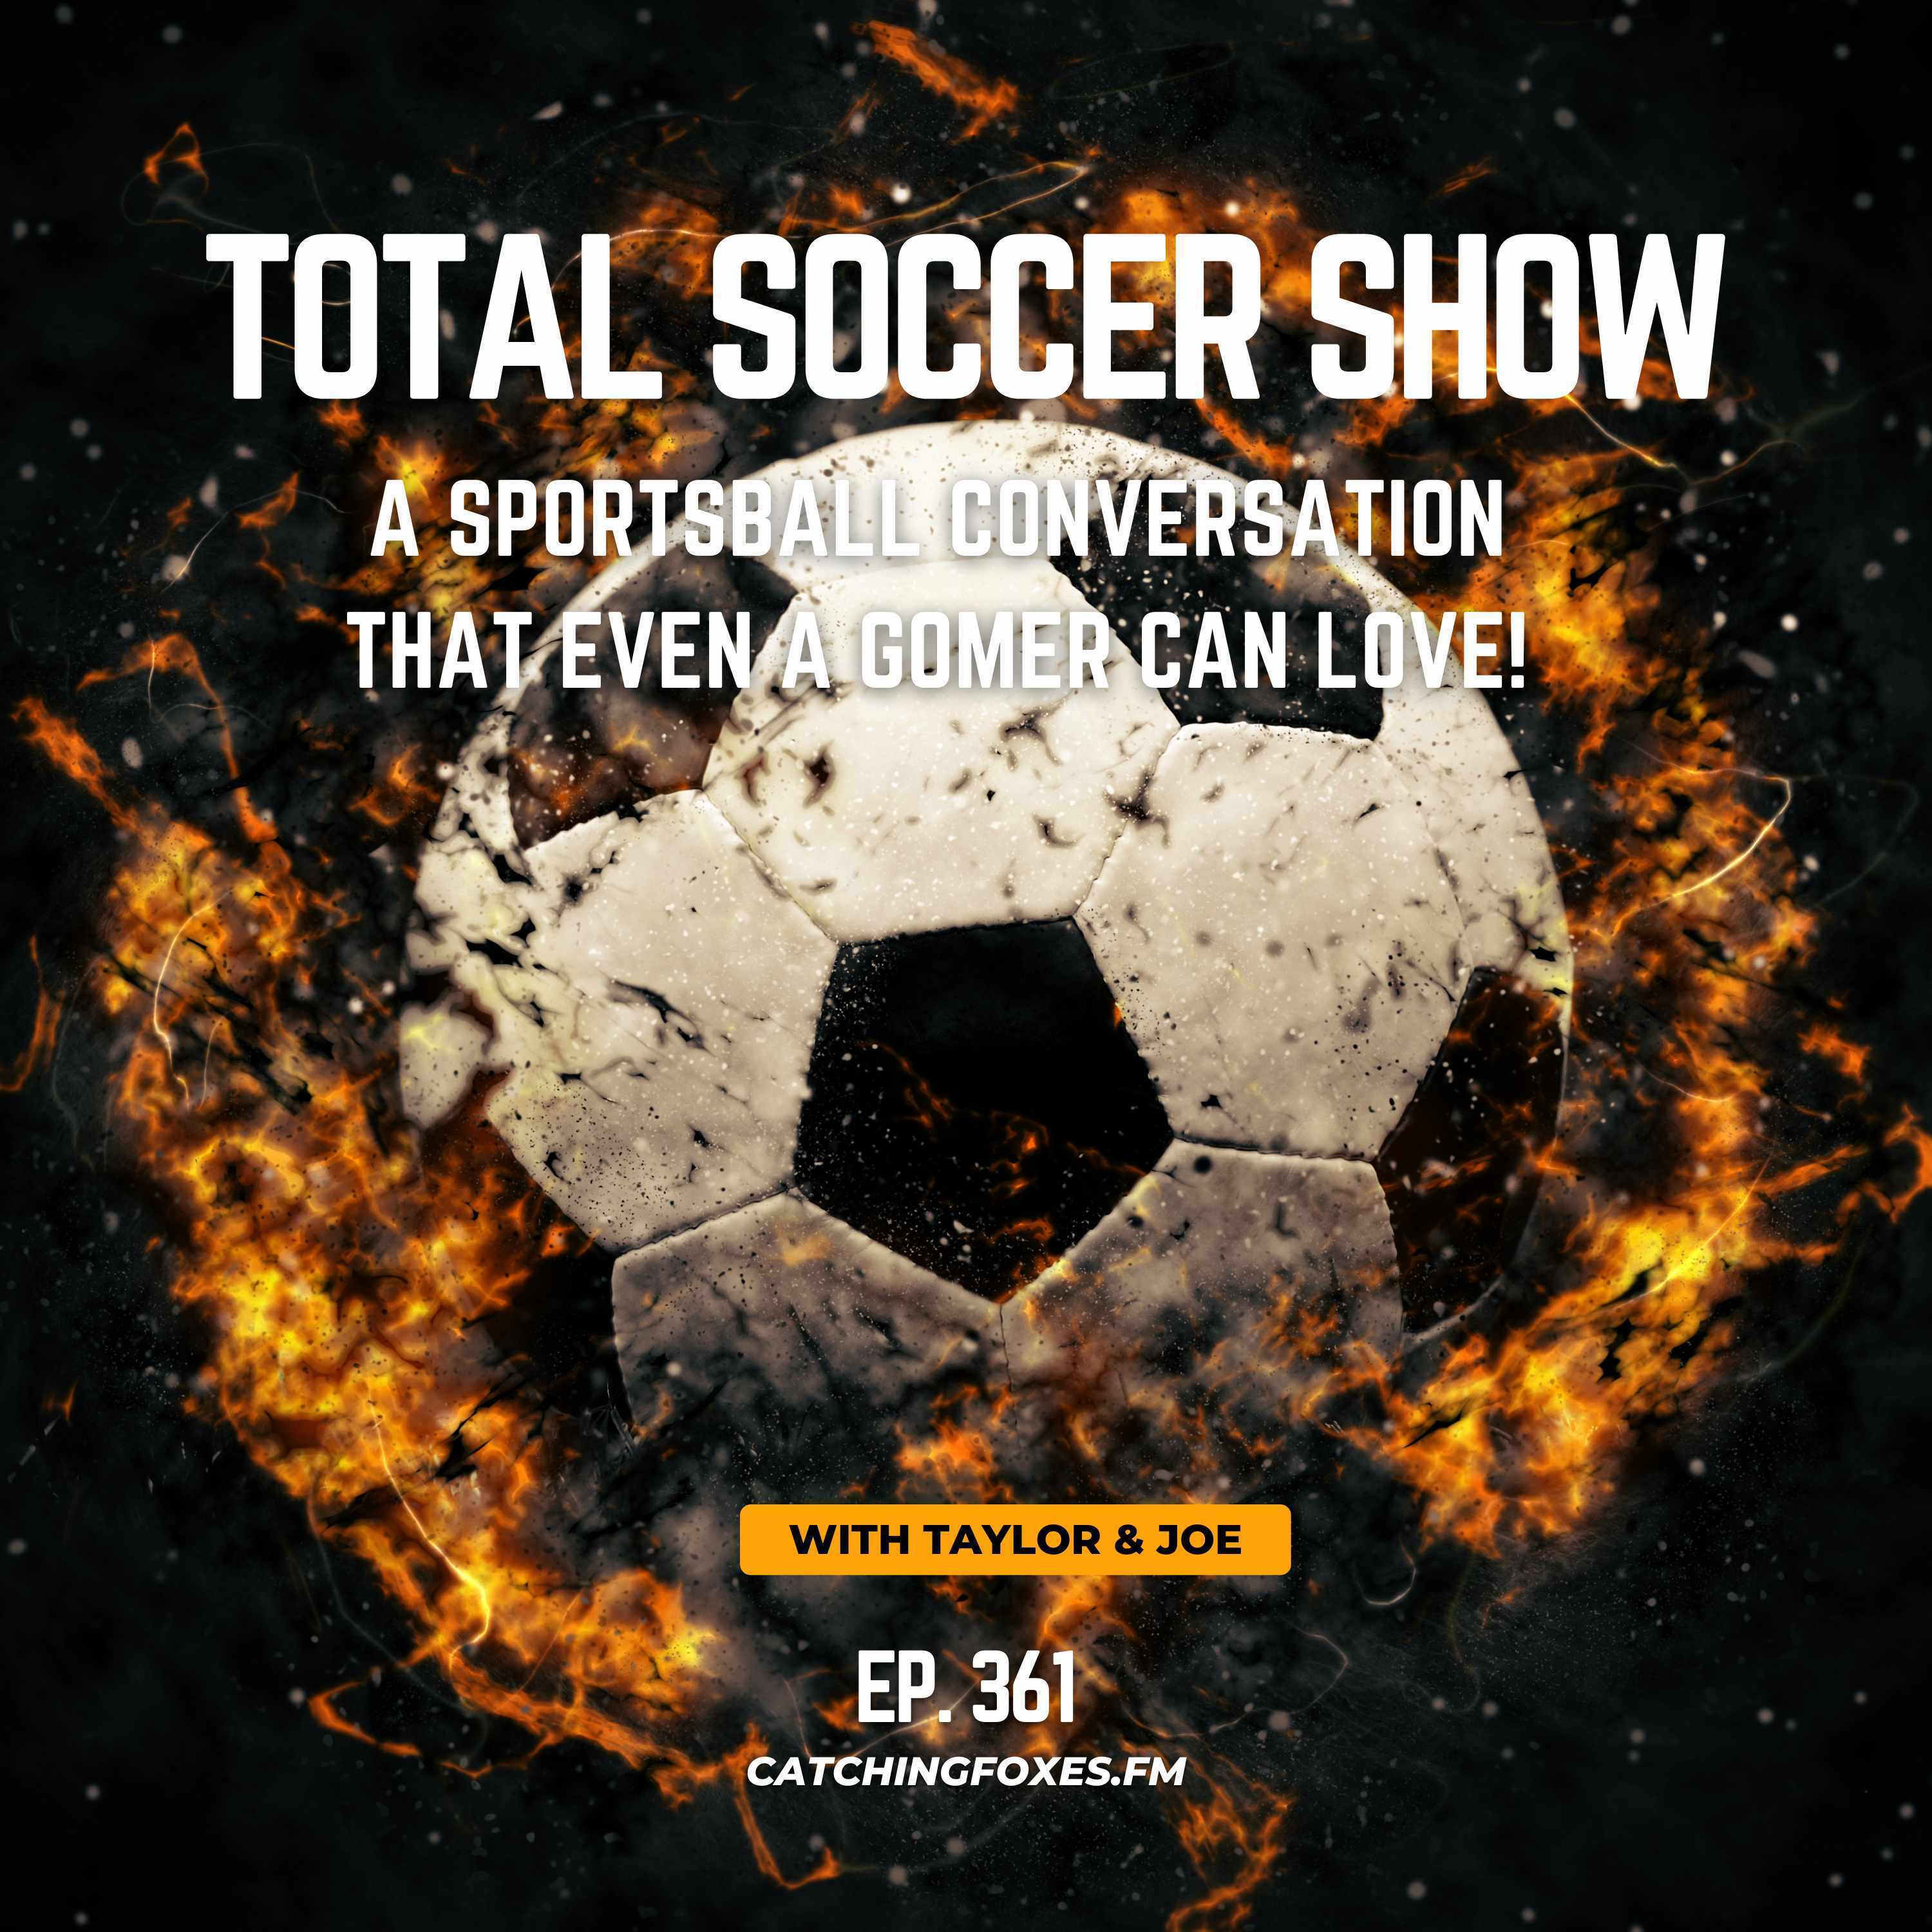 An Incredible Interview with the guys from the famous Total Soccer Show!